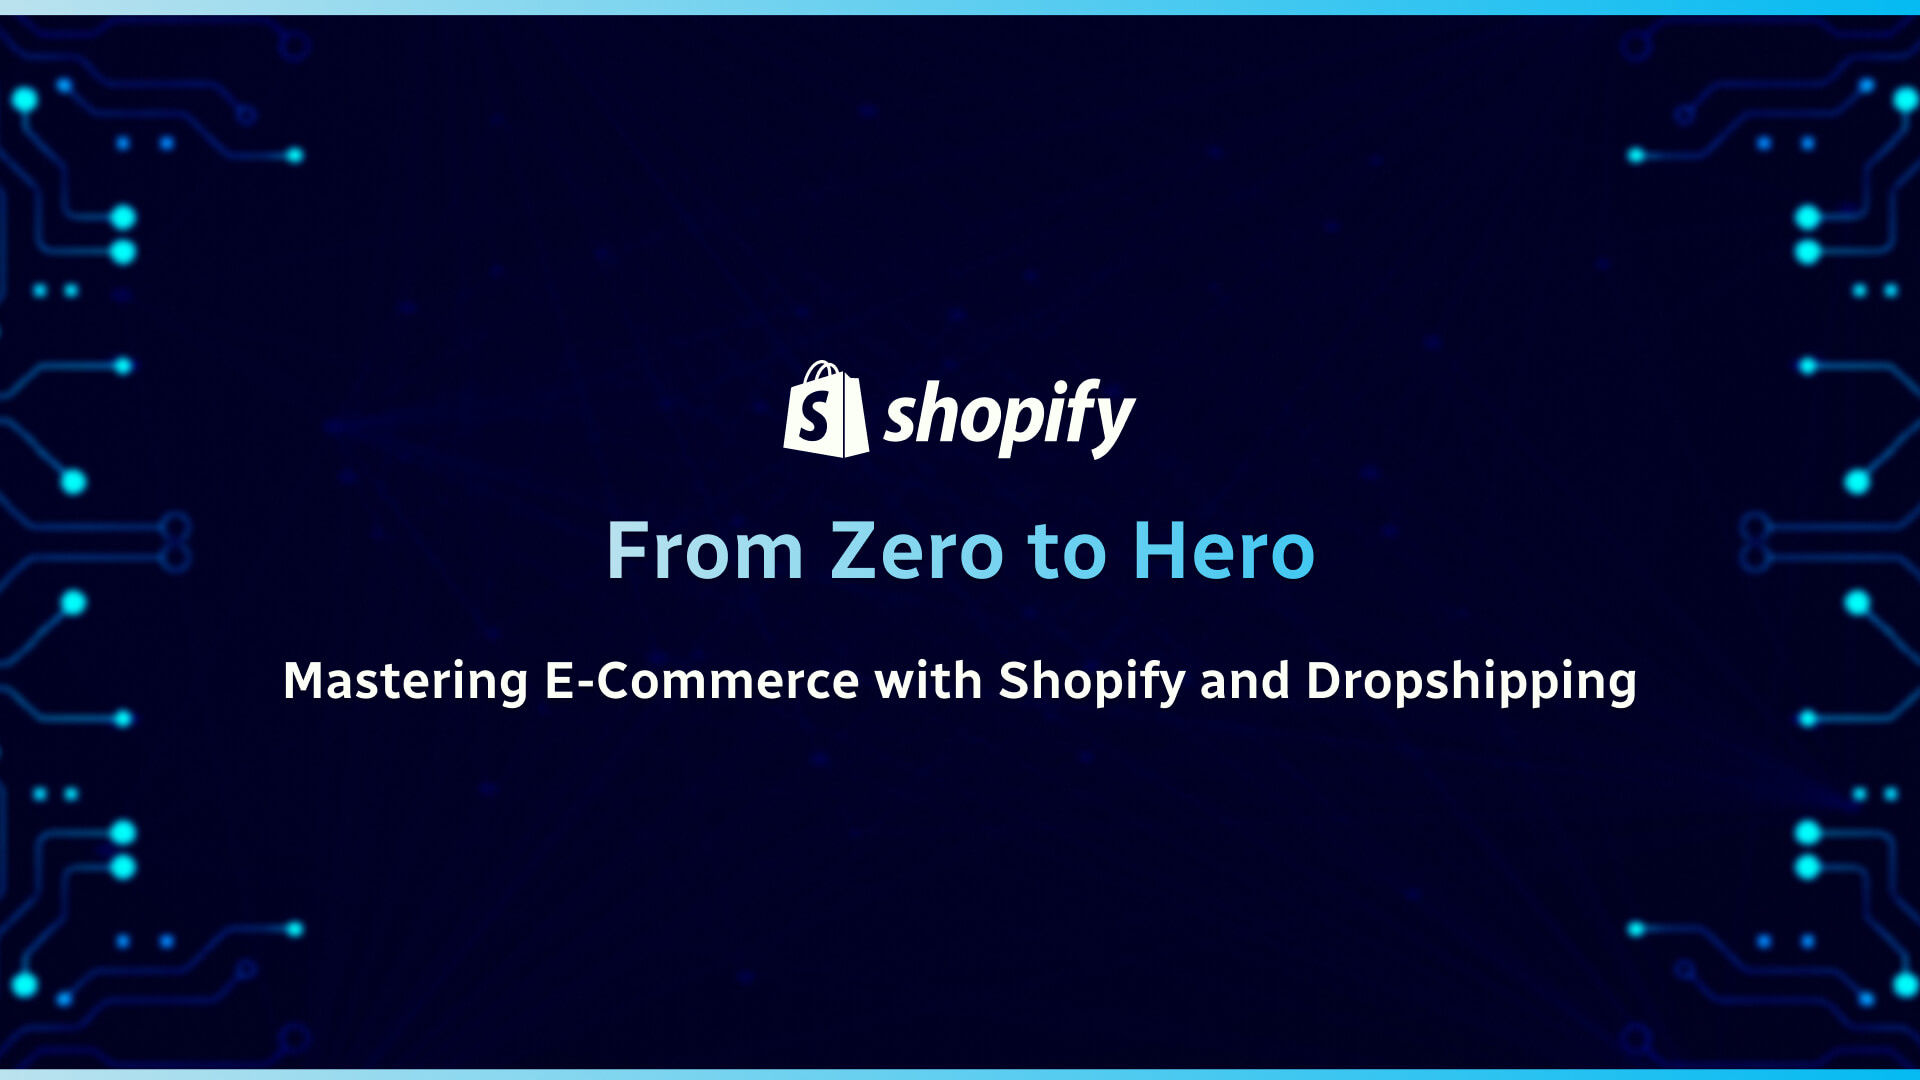 From Zero to Hero: Mastering E-Commerce with Shopify and Dropshipping